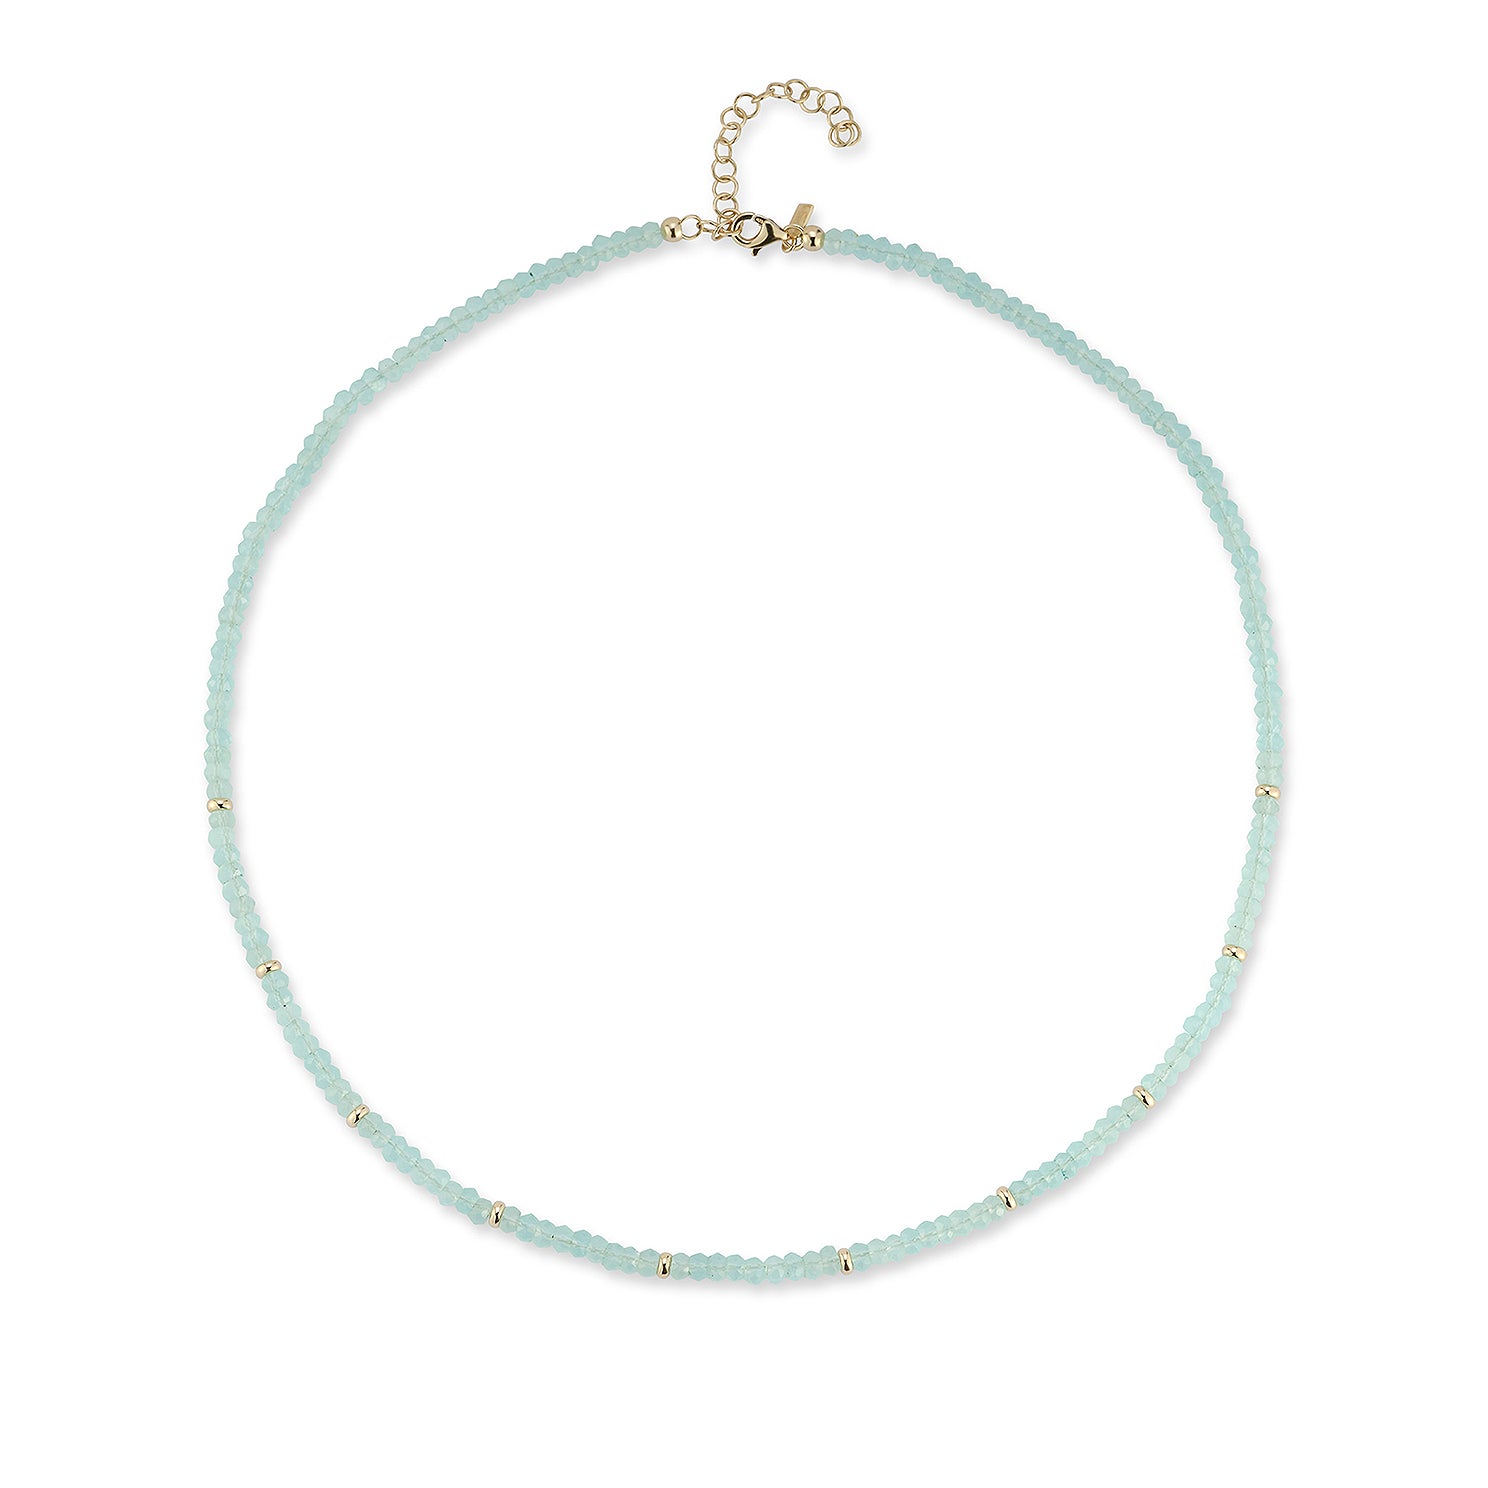 Birthstone Bead Necklace In Chalcedony with 14k yellow gold chain